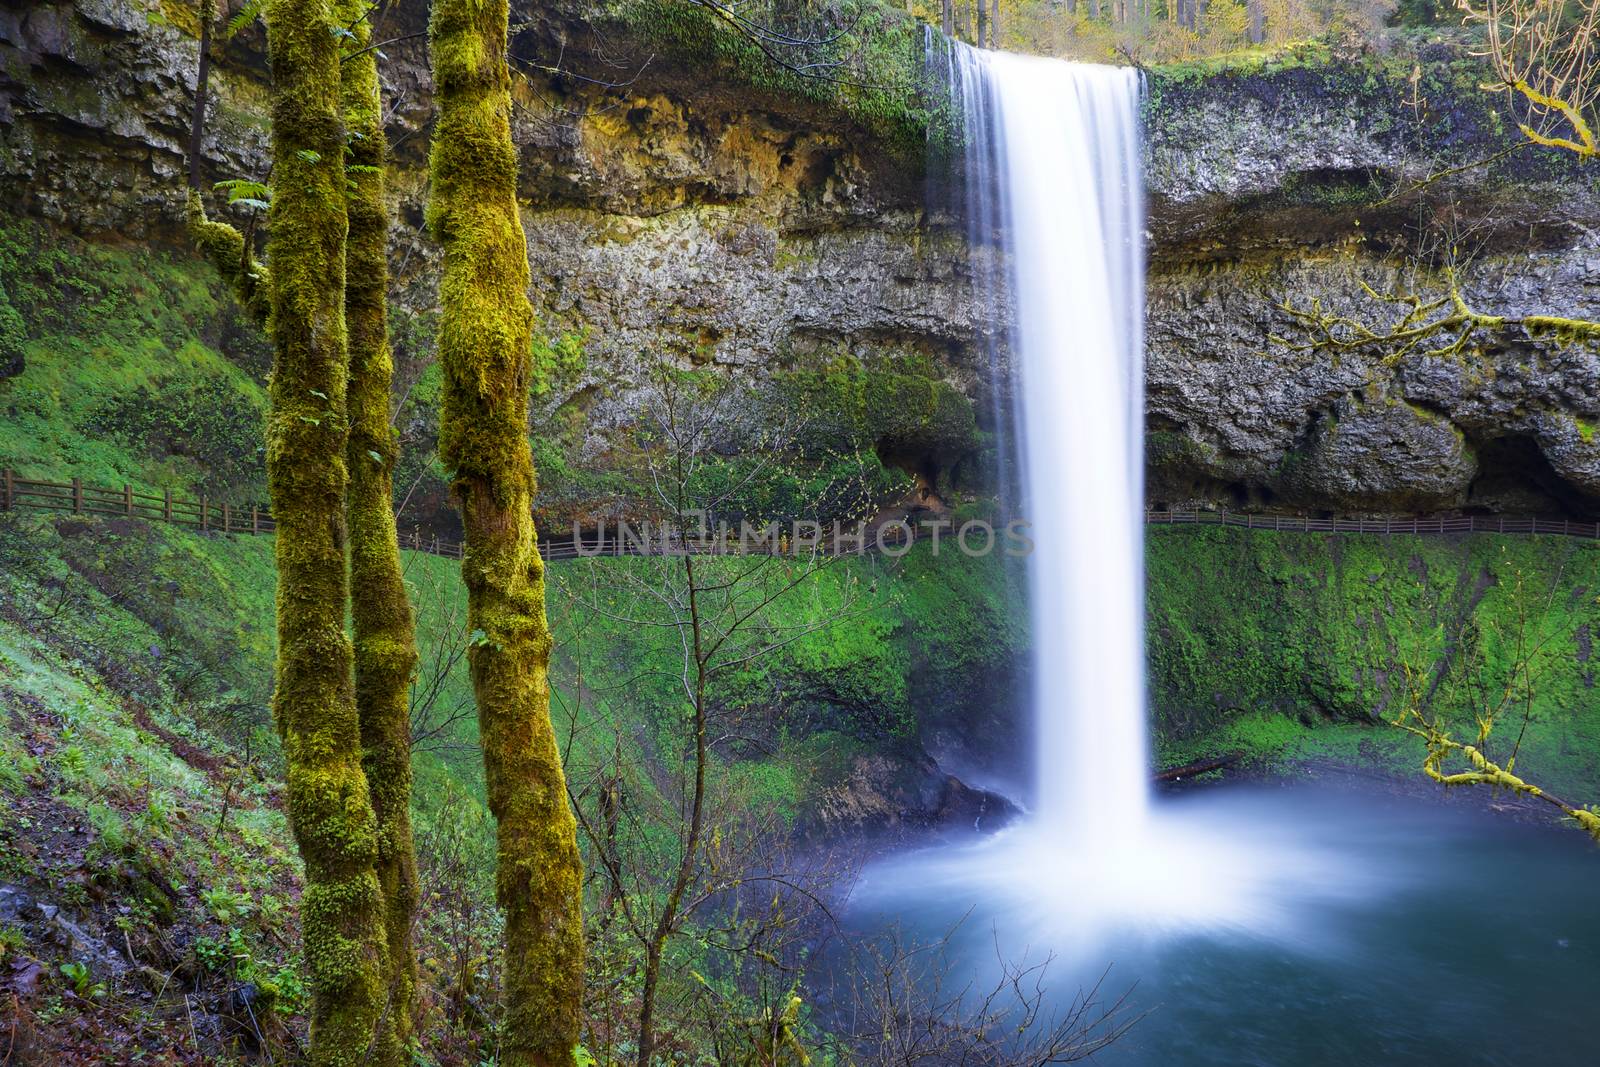 South Falls at Silver Falls Park in Oregon with water falling into a pond done with slow exposure